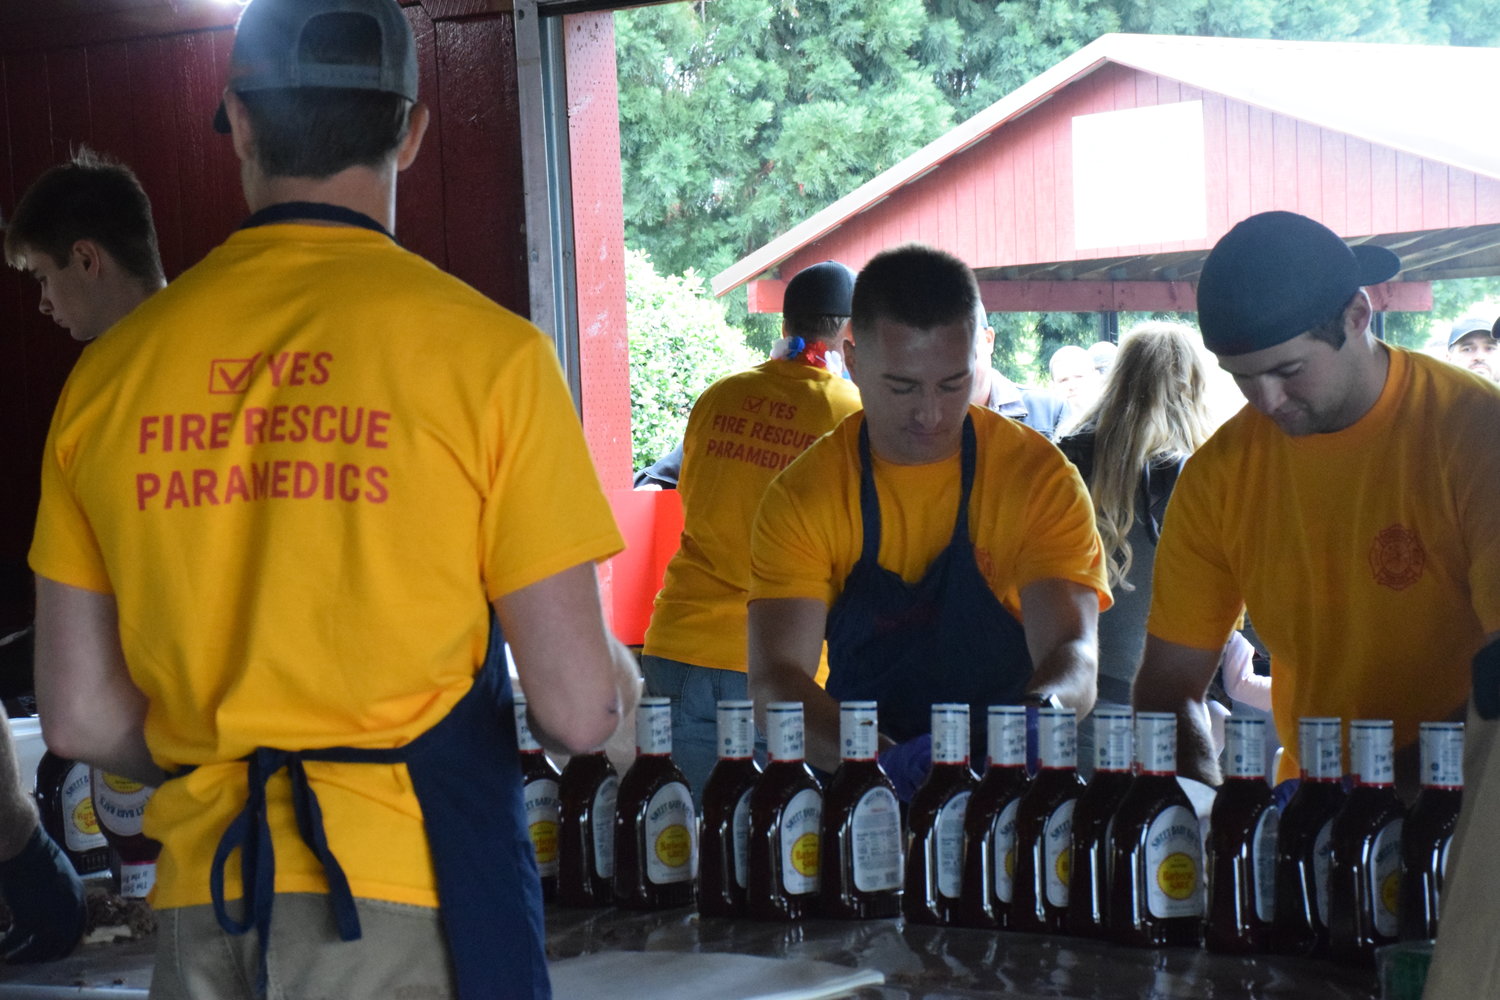 A Clark-Cowlitz Fire Rescue crew prepares to sauce up barbecued meats as part of the firefighters’ association’s annual feed during Woodland’s Planters Days on June 18.